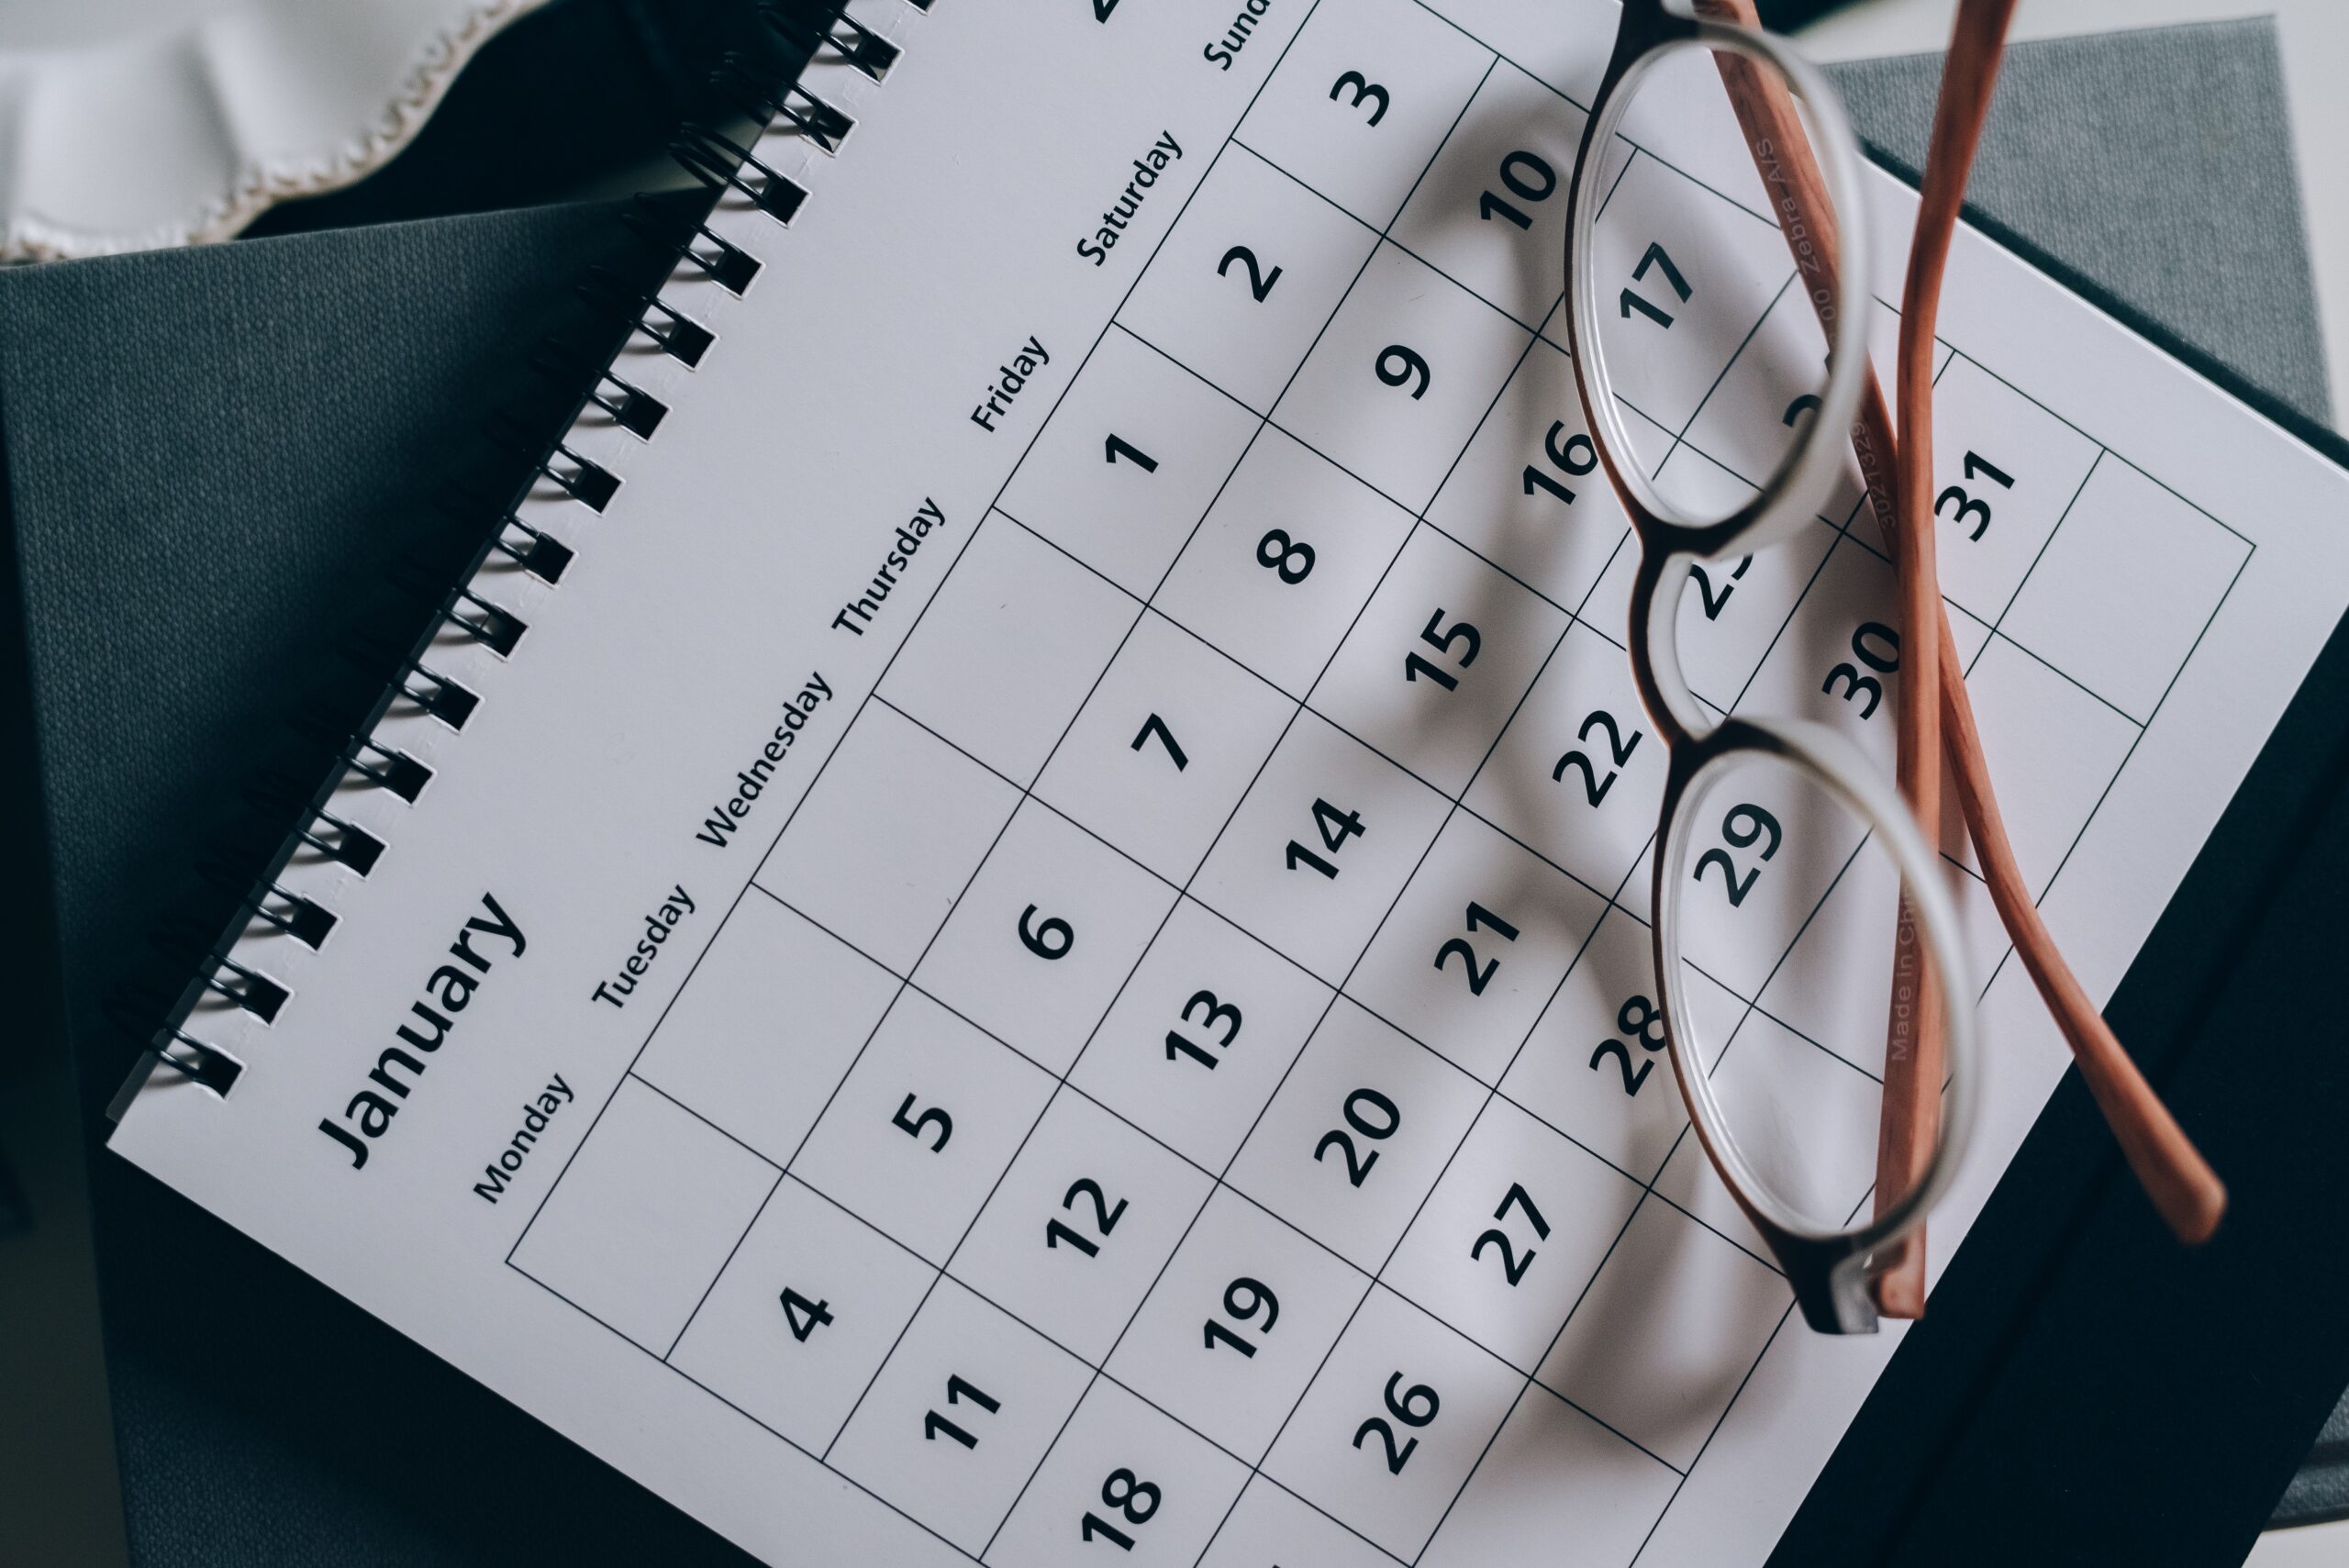 pair of glasses resting on a calendar